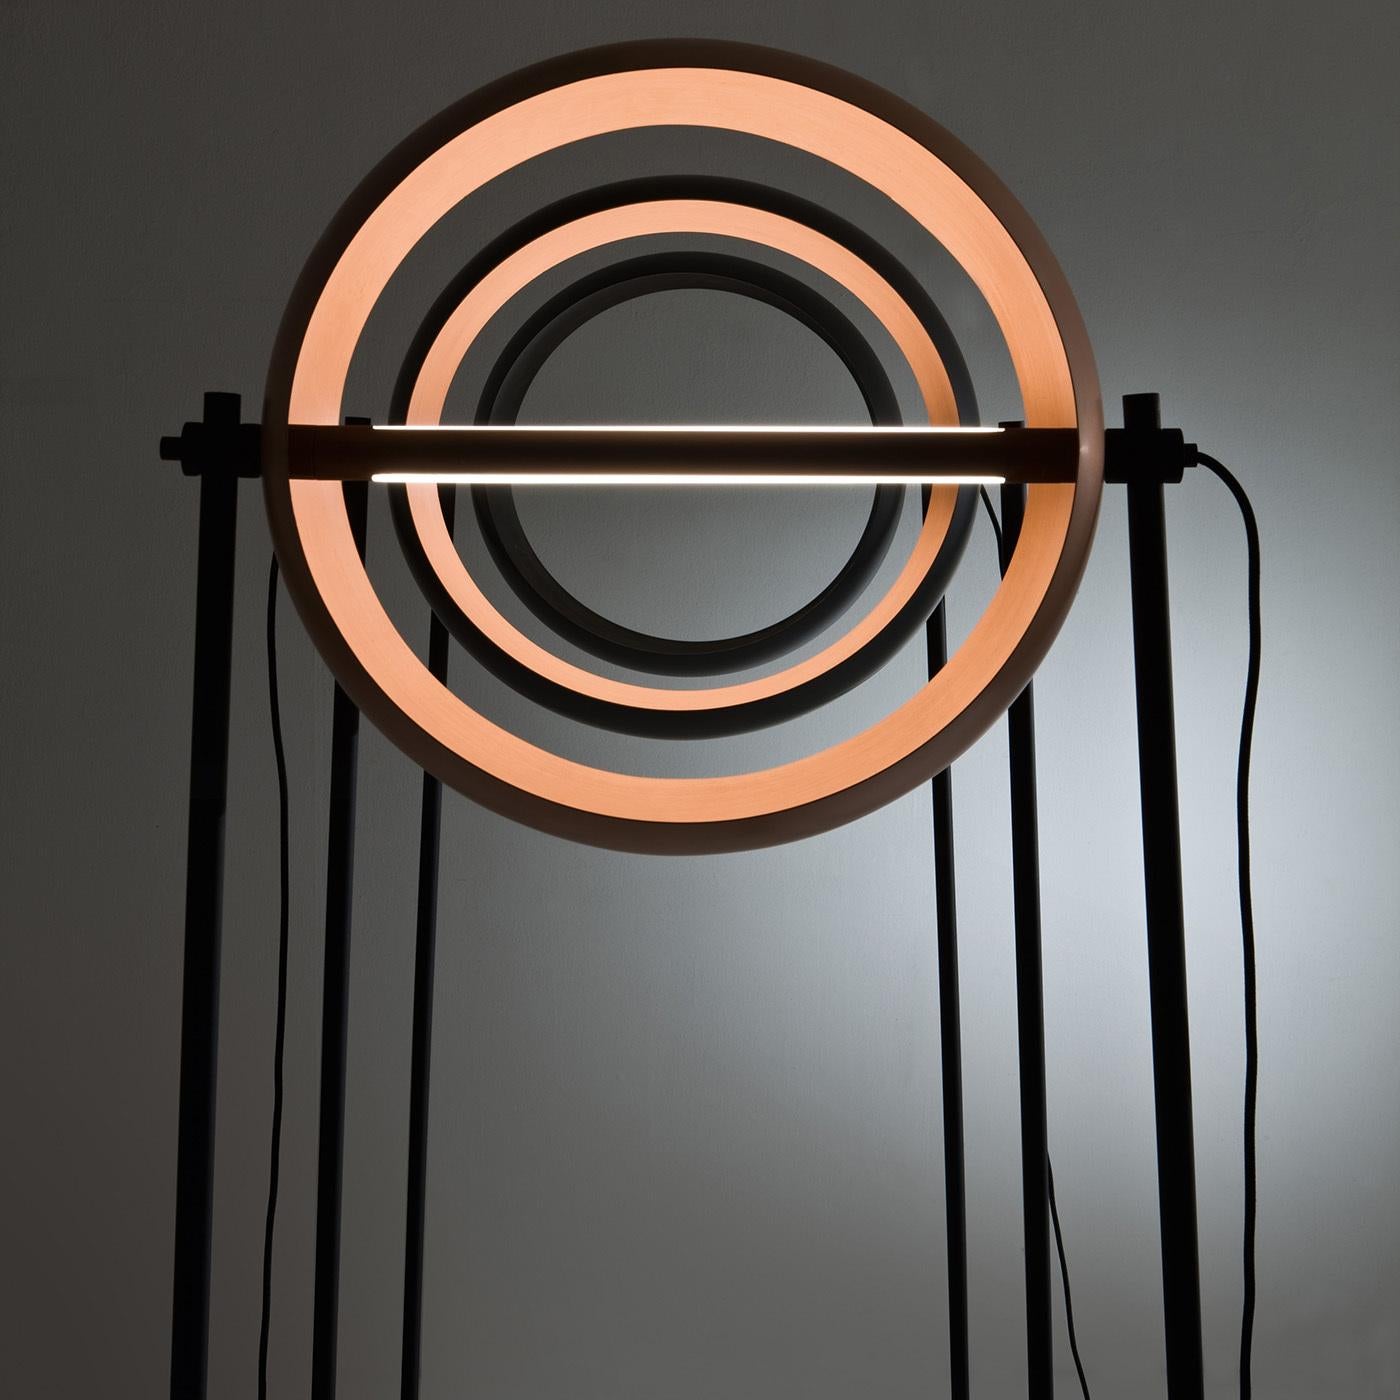 This captivating floor lamp is an exclusive award-winning design by Edoardo Colzani that features a finely sculpted metal base, a distinctive central pivot, and an entirely hand-crafted satin copper rotating lampshade. The warm LED lighting enhances